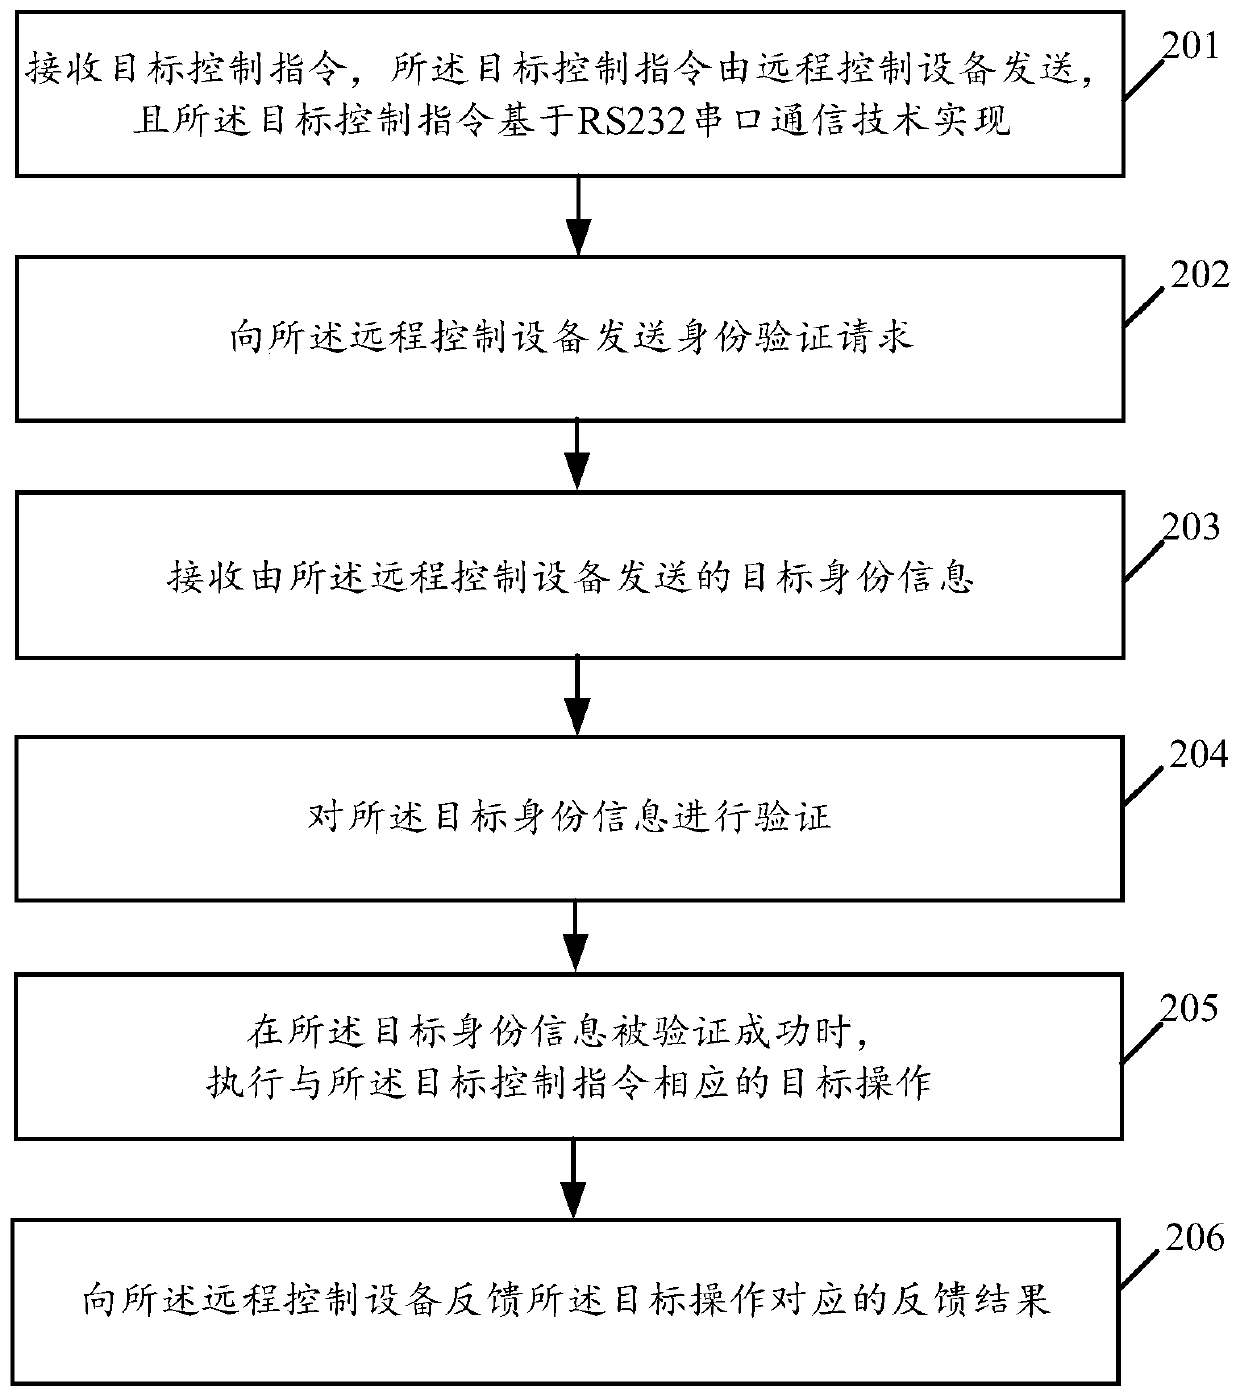 Remote communication implementation method, intelligent projector and related product